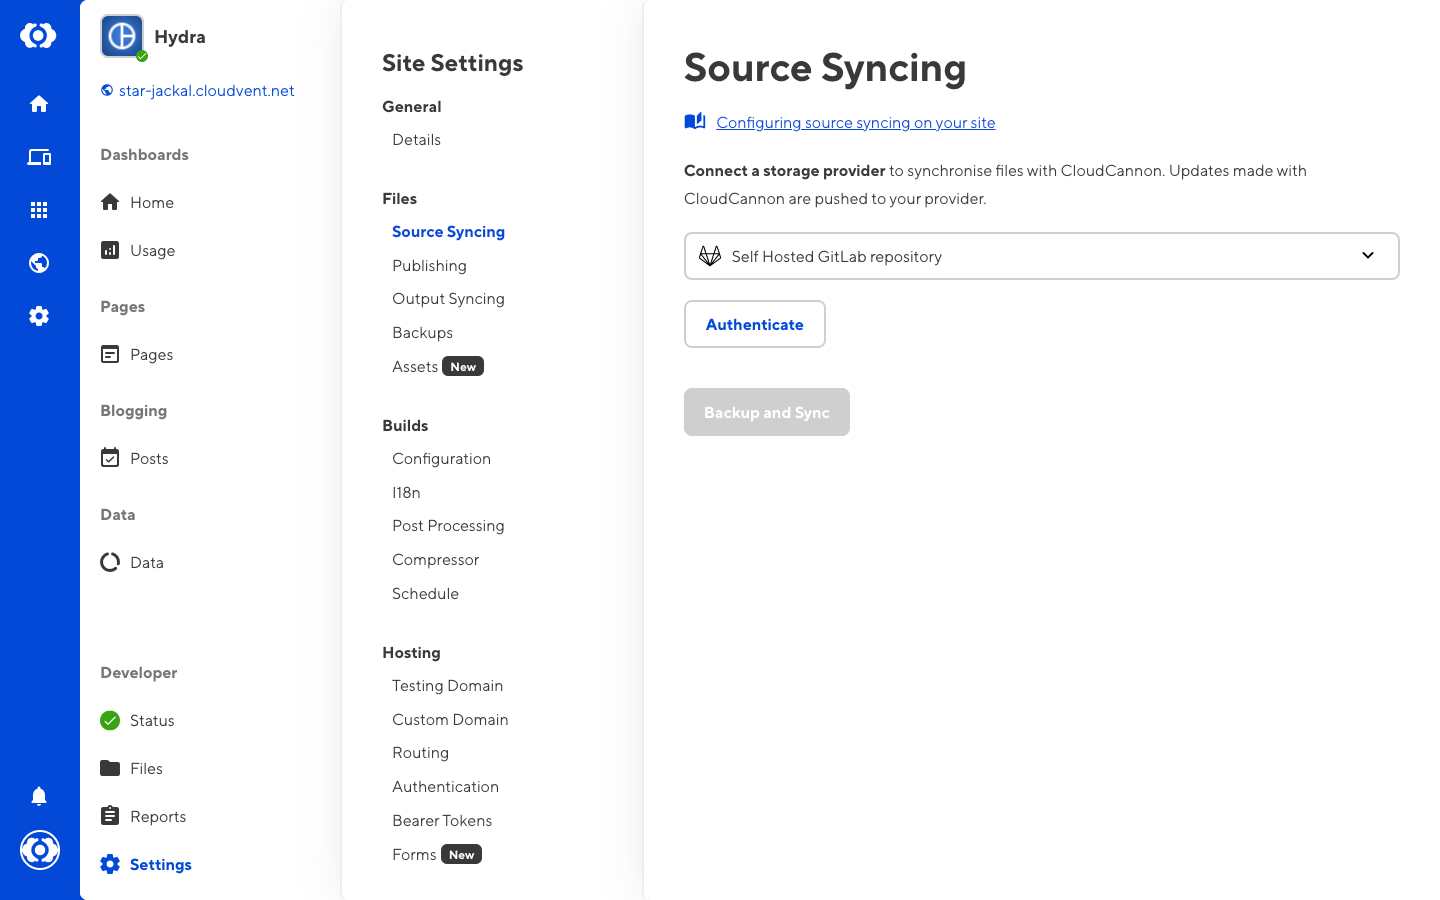 Selecting self hosted GitLab as the your provider